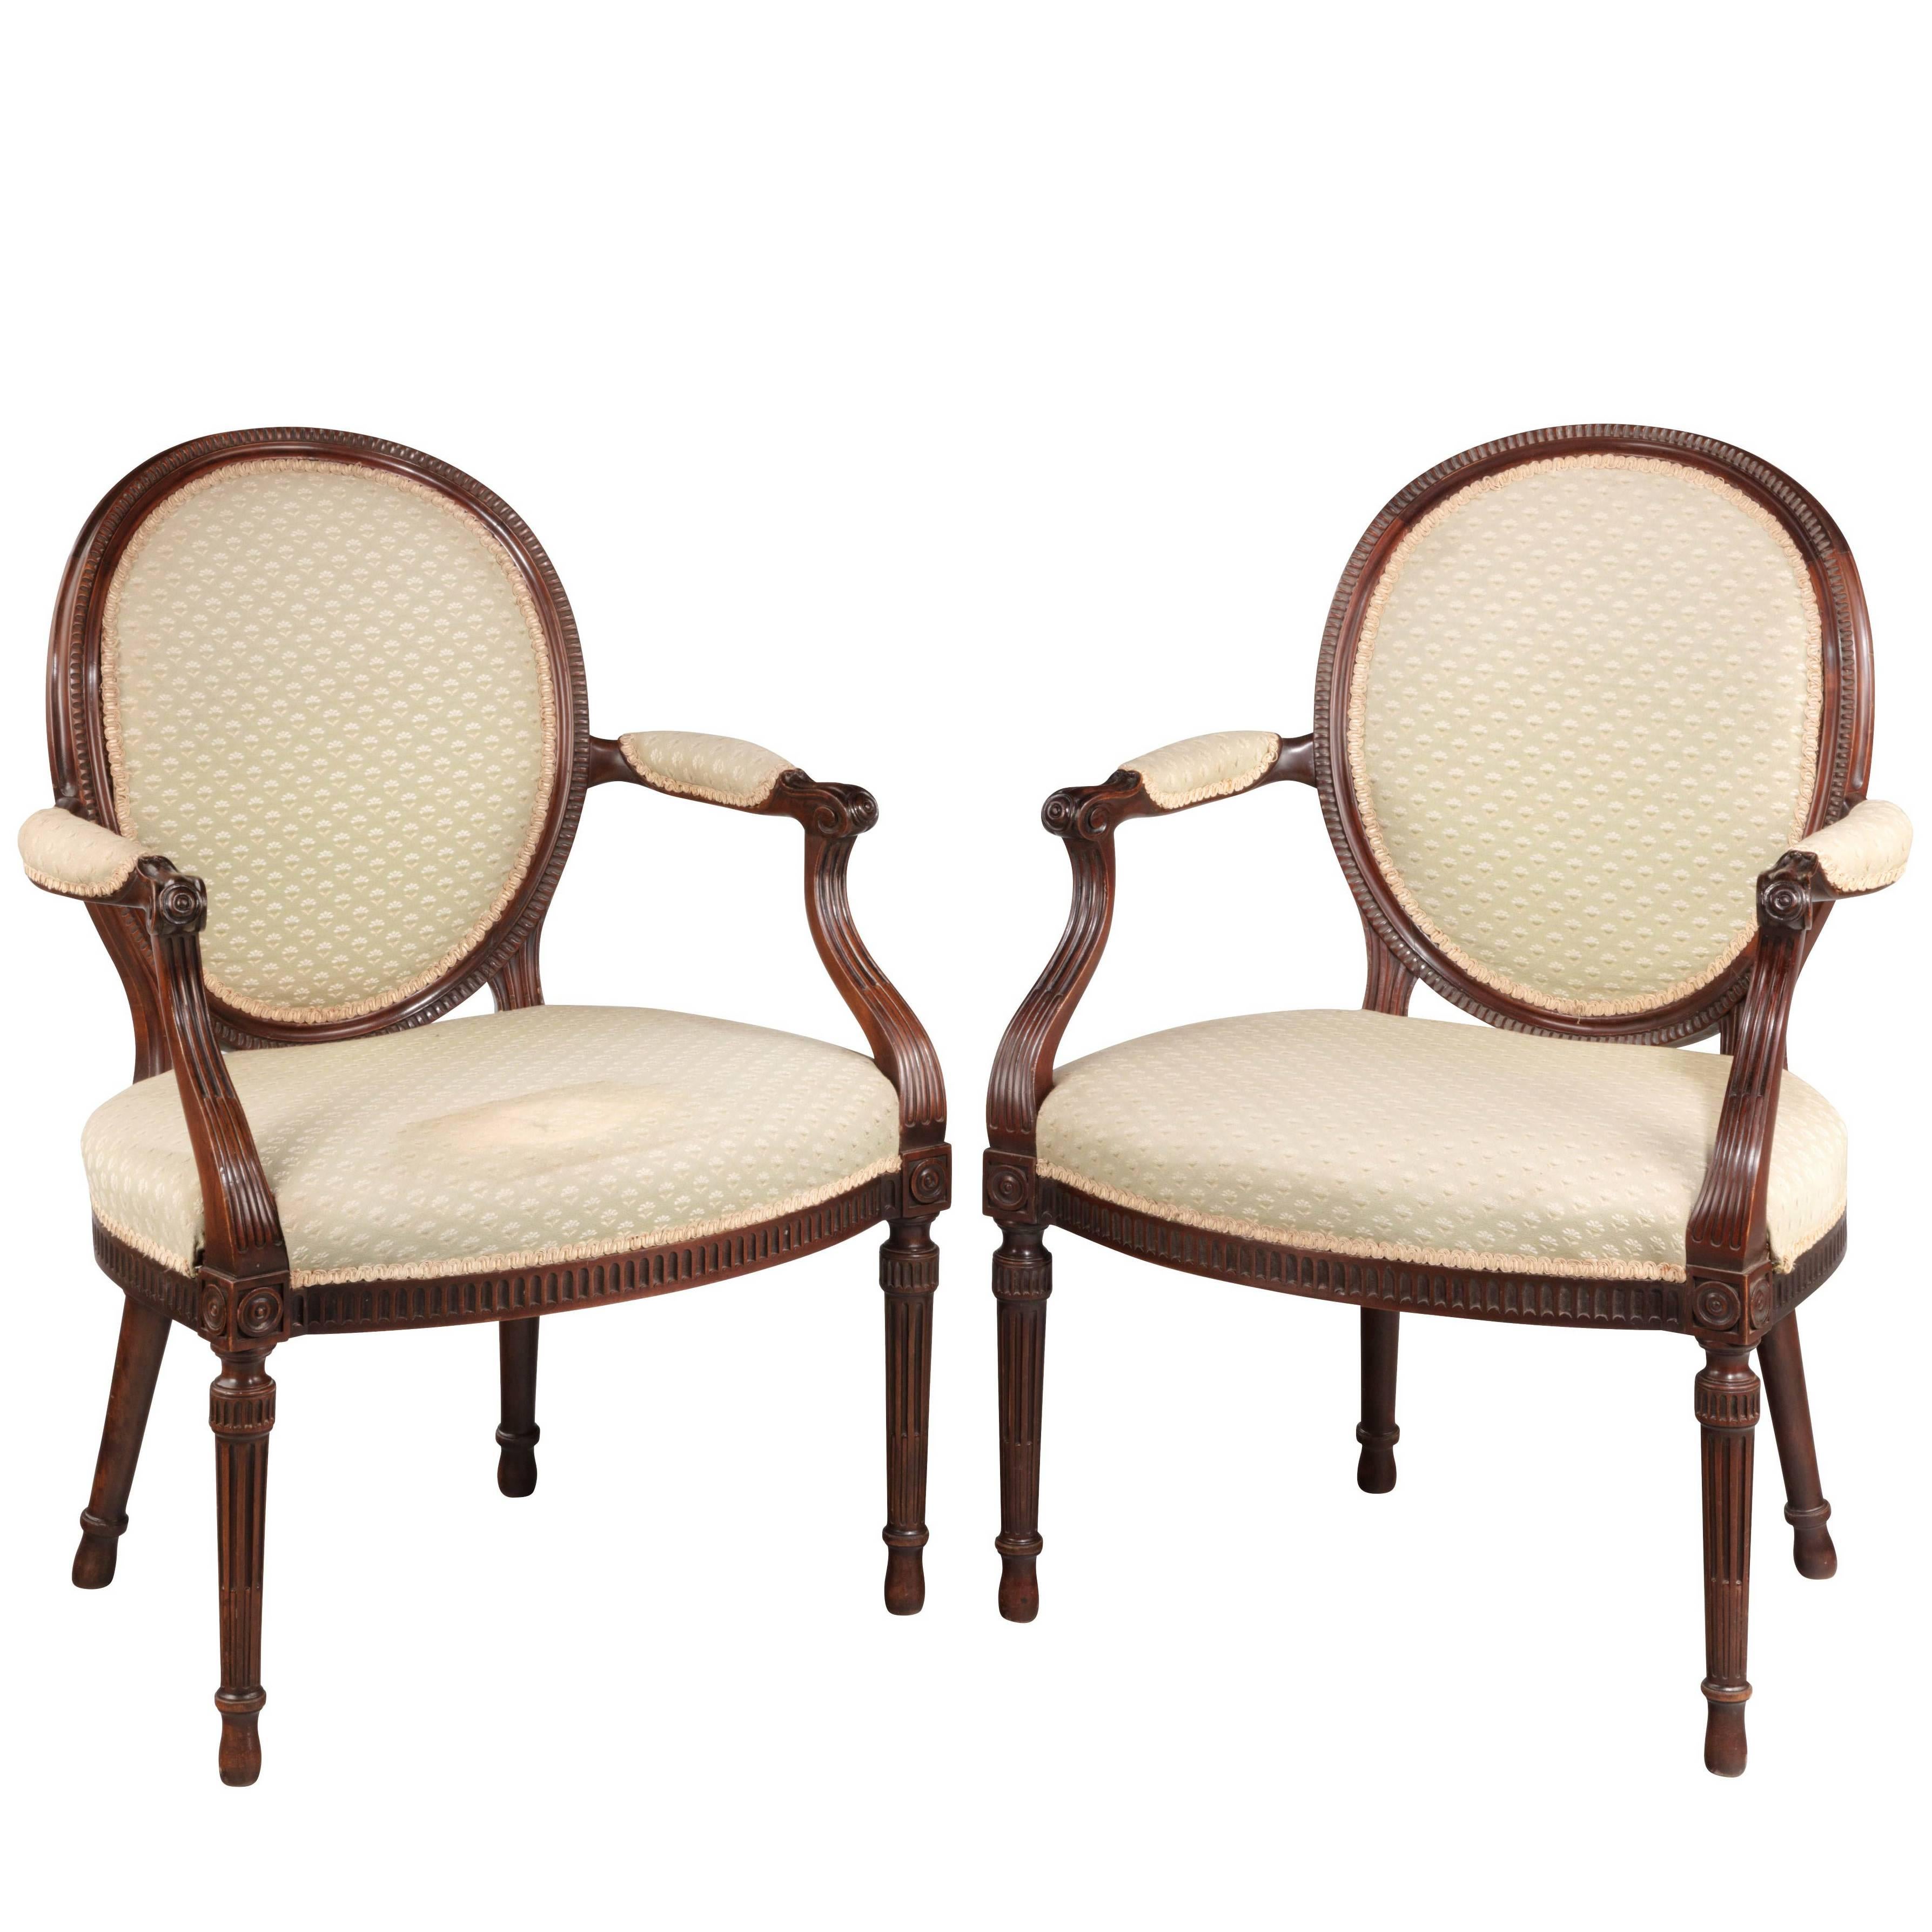 Pair of George III Style Hepplewhite Elbow Chairs with Reeded Incised Decoration